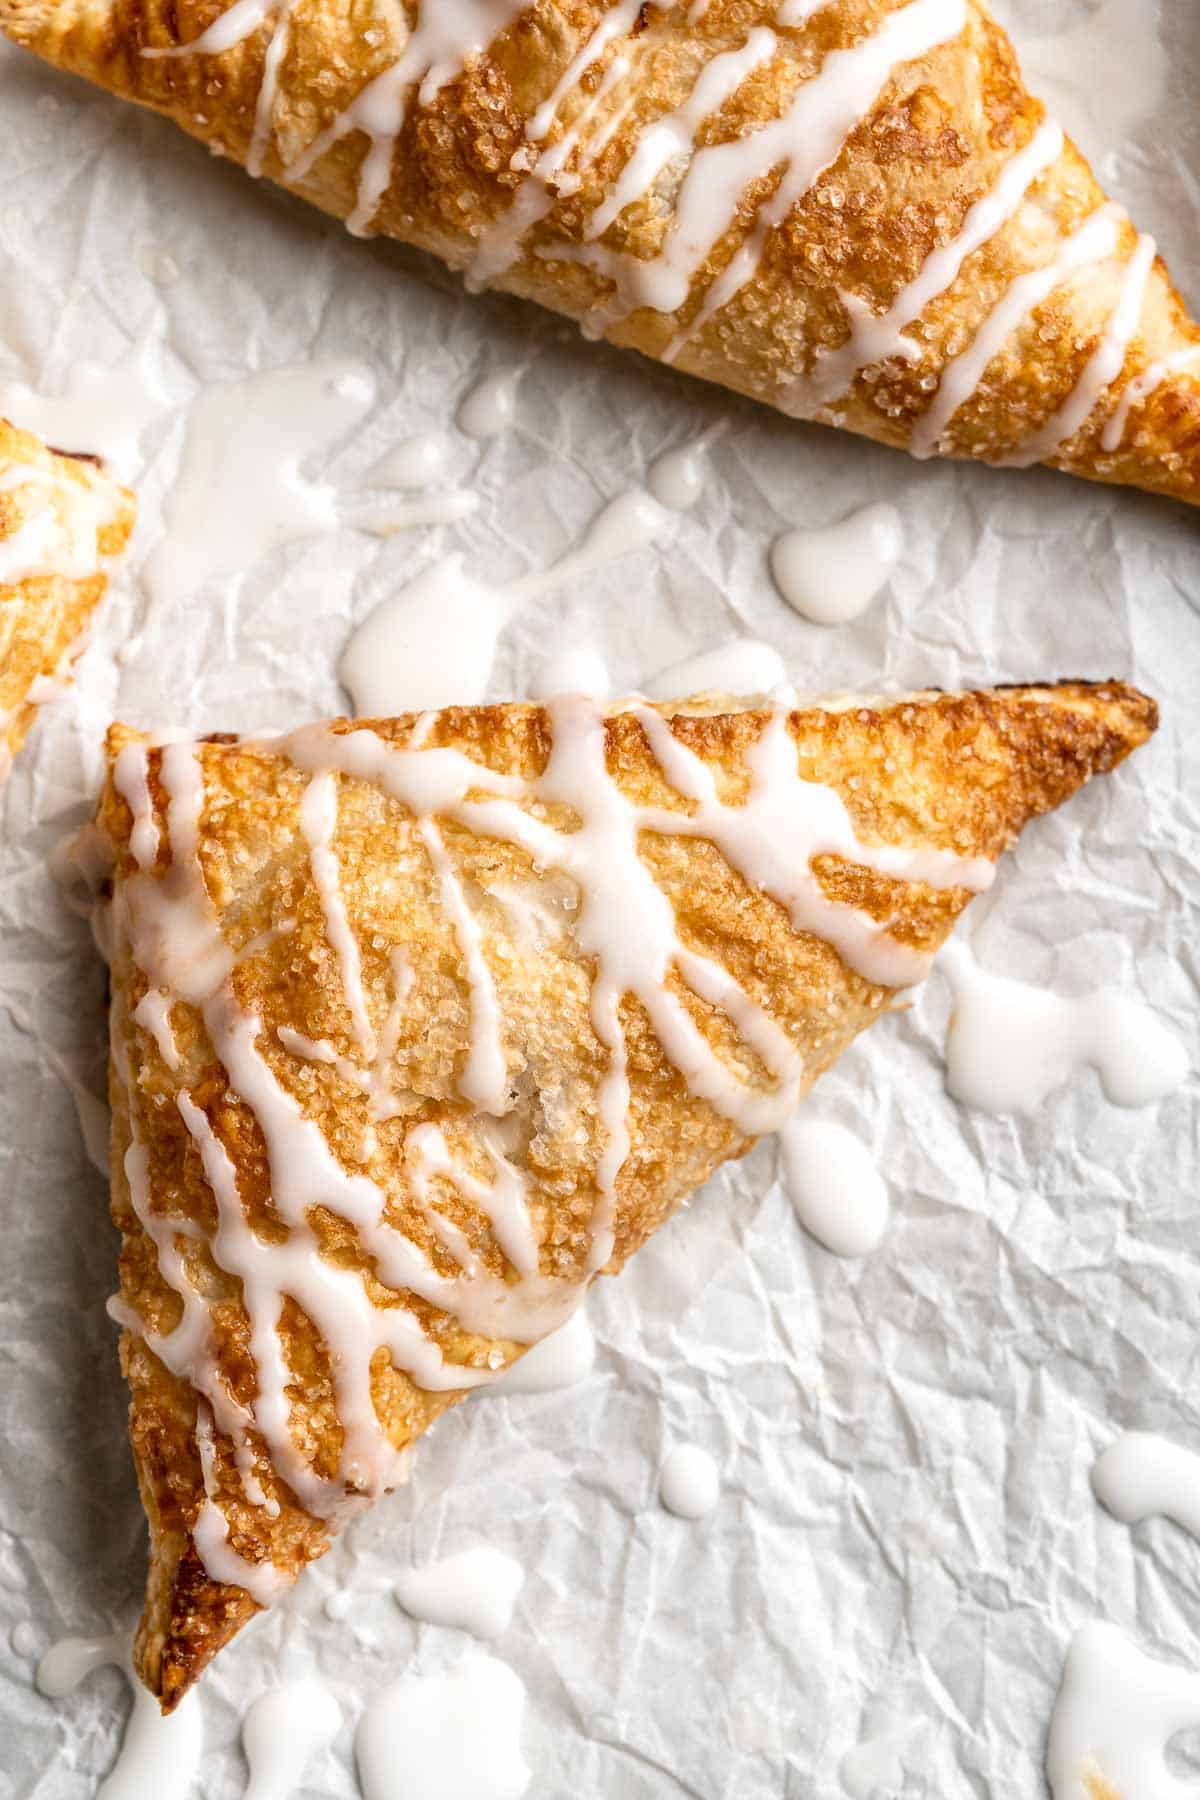 With a buttery, flaky crust and spiced sweet apple filling, these homemade Apple Turnovers are hands down one of the best ways to enjoy this seasonal fruit. | aheadofthyme.com